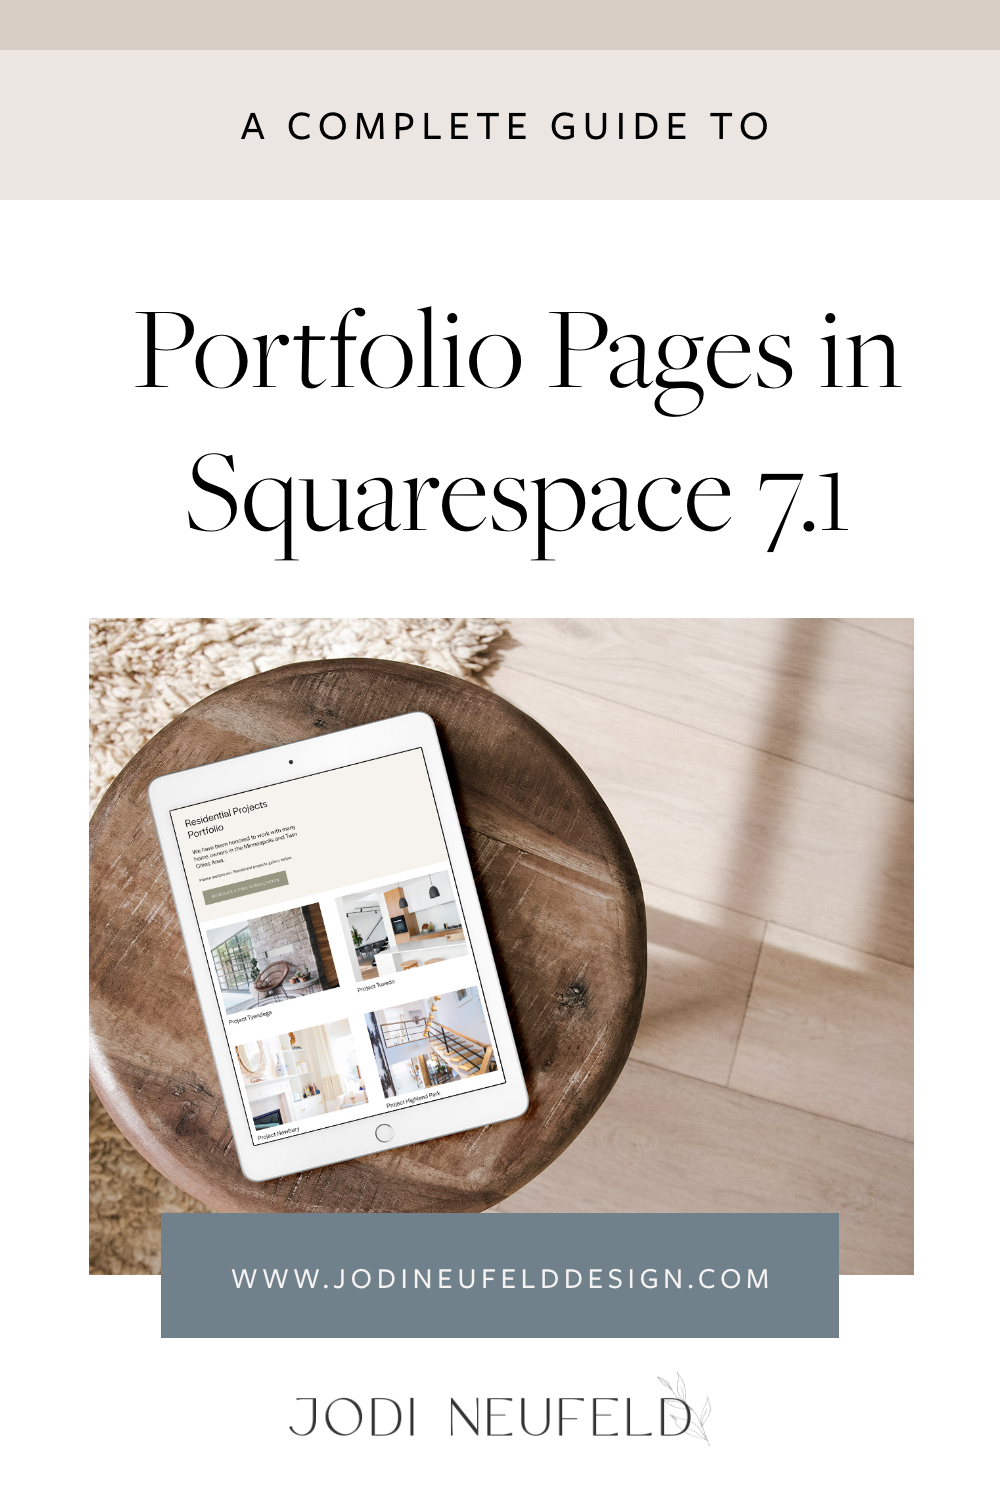 Portfolio pages in Squarespace 7.1 by Jodi Neufeld Design 3.png